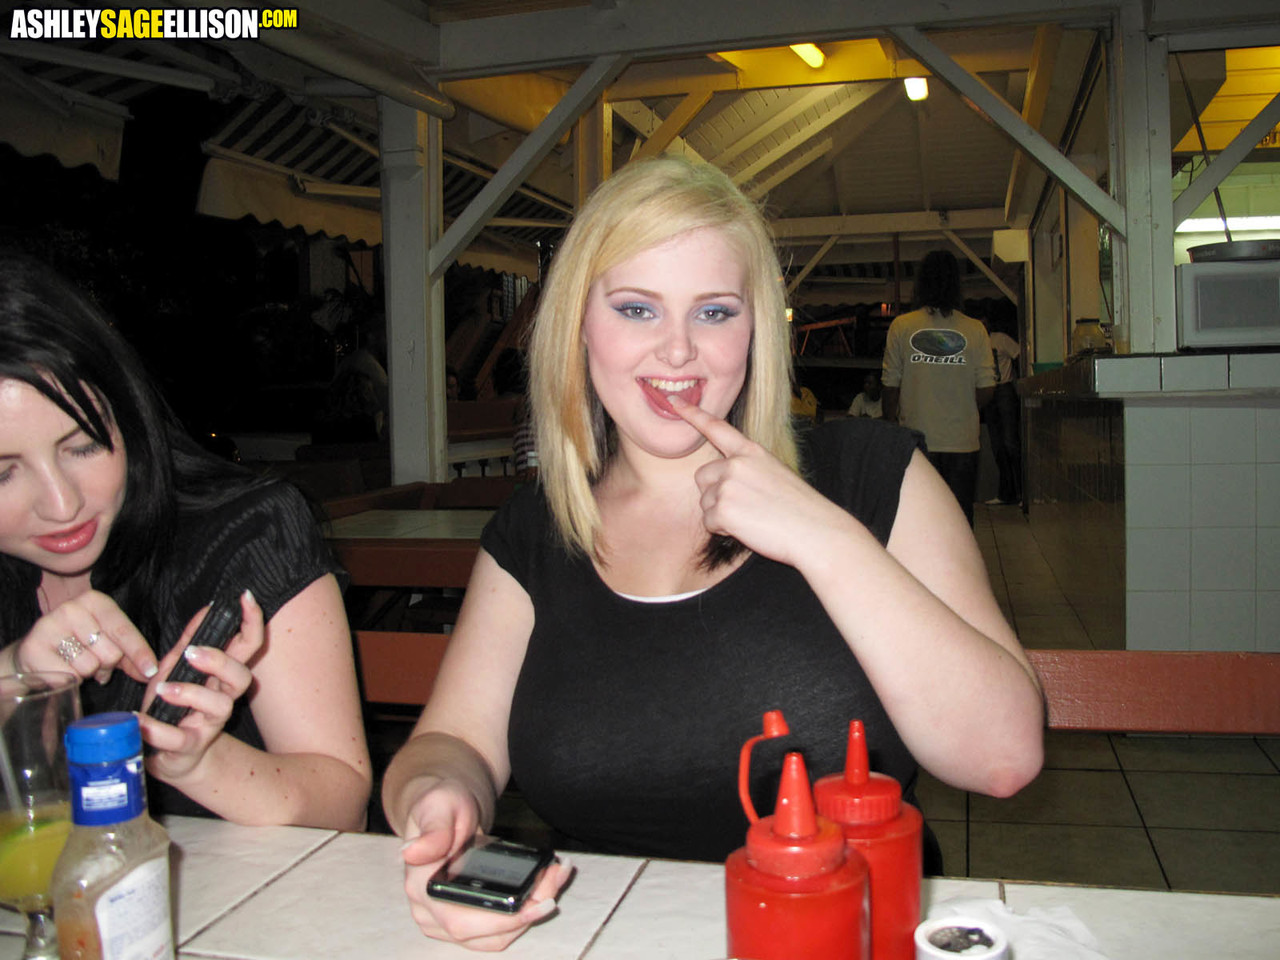 Fat chick Ashley Sage Ellison and her busty gf go out on the town photo porno #426376435 | Ashley Sage Ellison Pics, Ashley Sage Ellison, Karina Hart, BBW, porno mobile